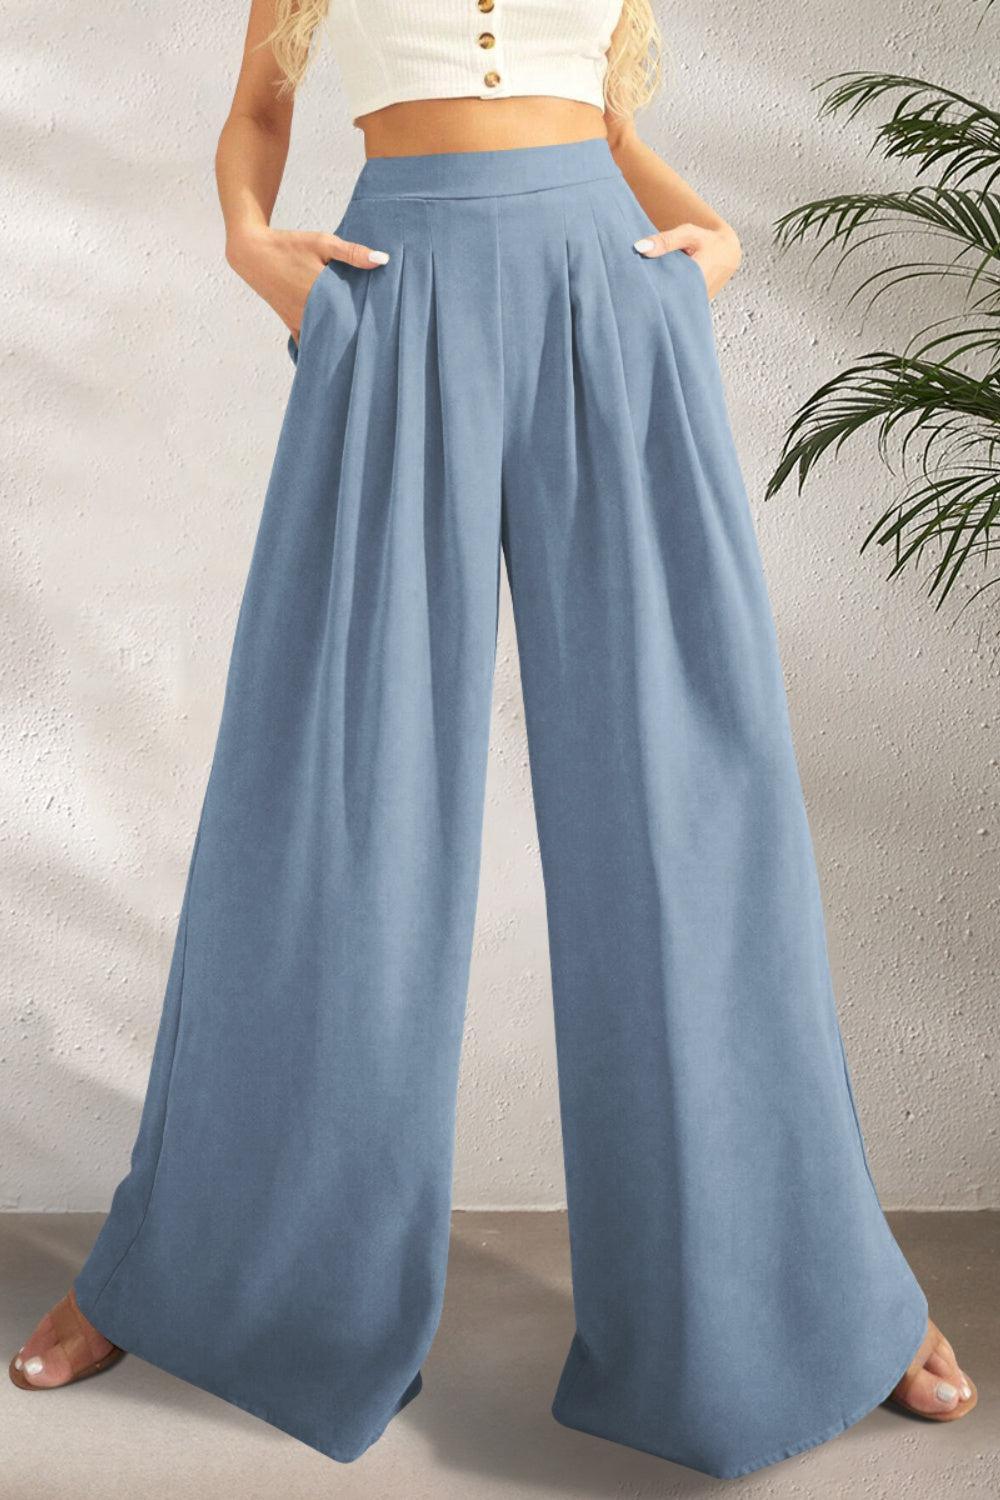 a woman in a white crop top and blue wide legged pants